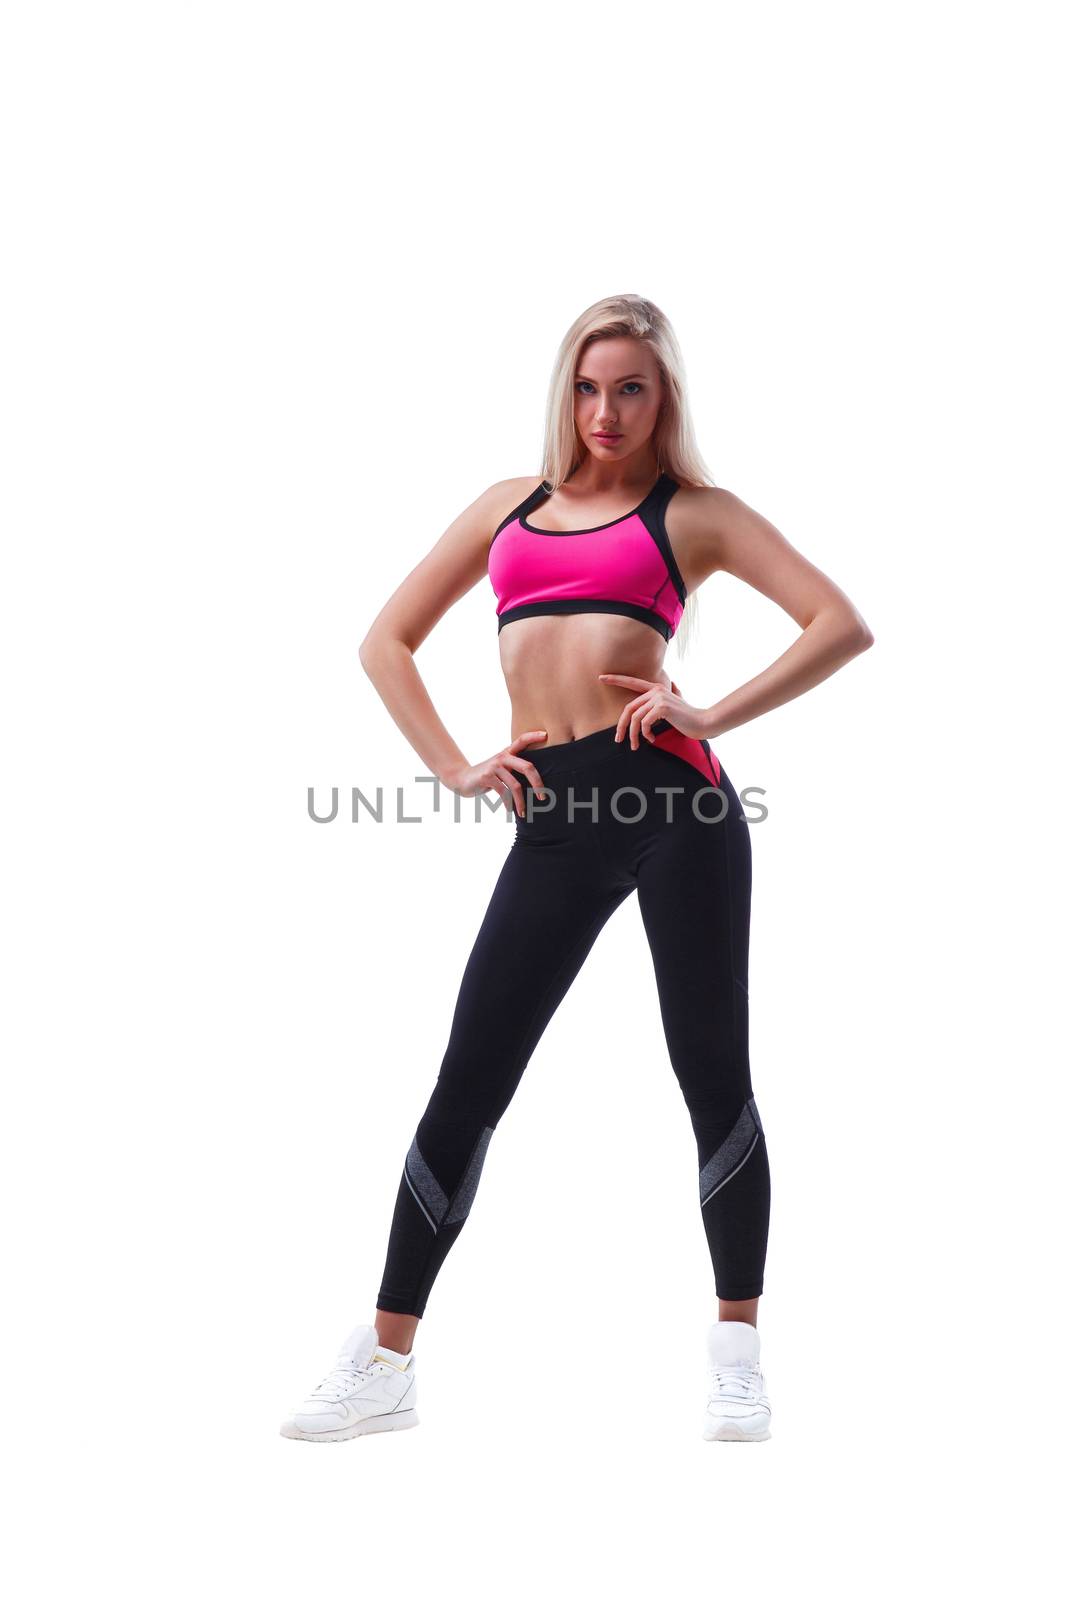 Portrait of a young fit woman in sportswear isolated on white background